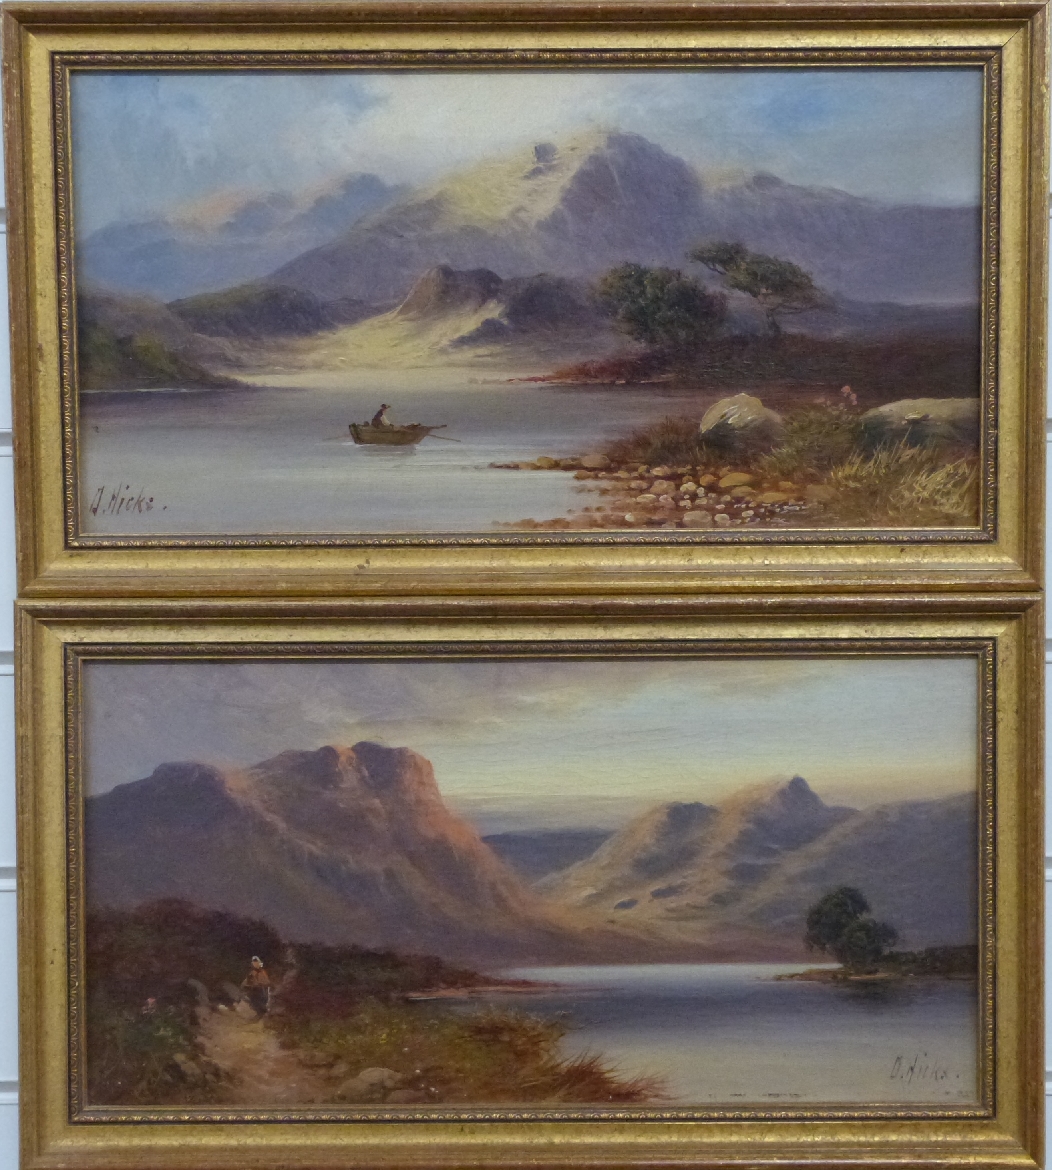 David Hicks (active 1885-1890) pair of oils on canvas, Highland loch and mountain scenes, each 20